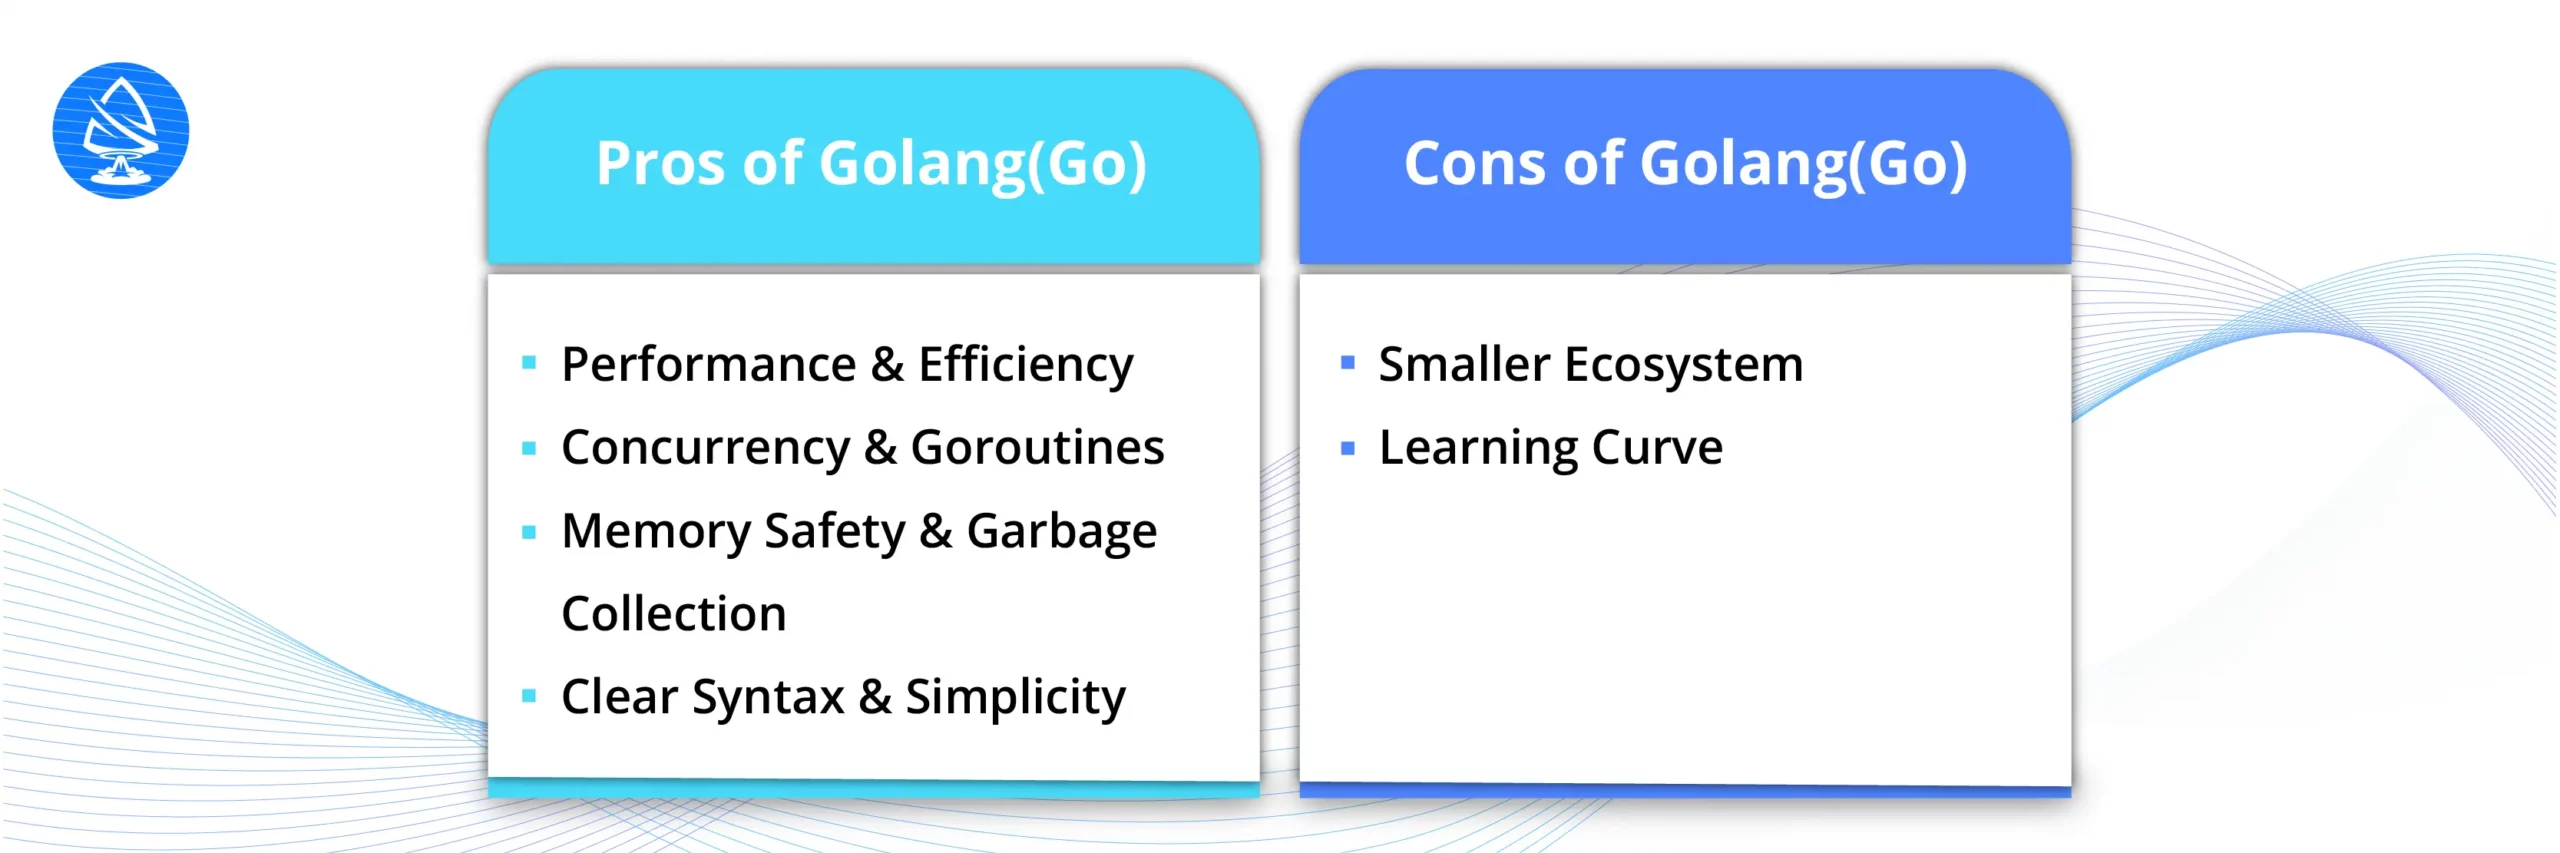 Pros and Cons of Golang (Go) 